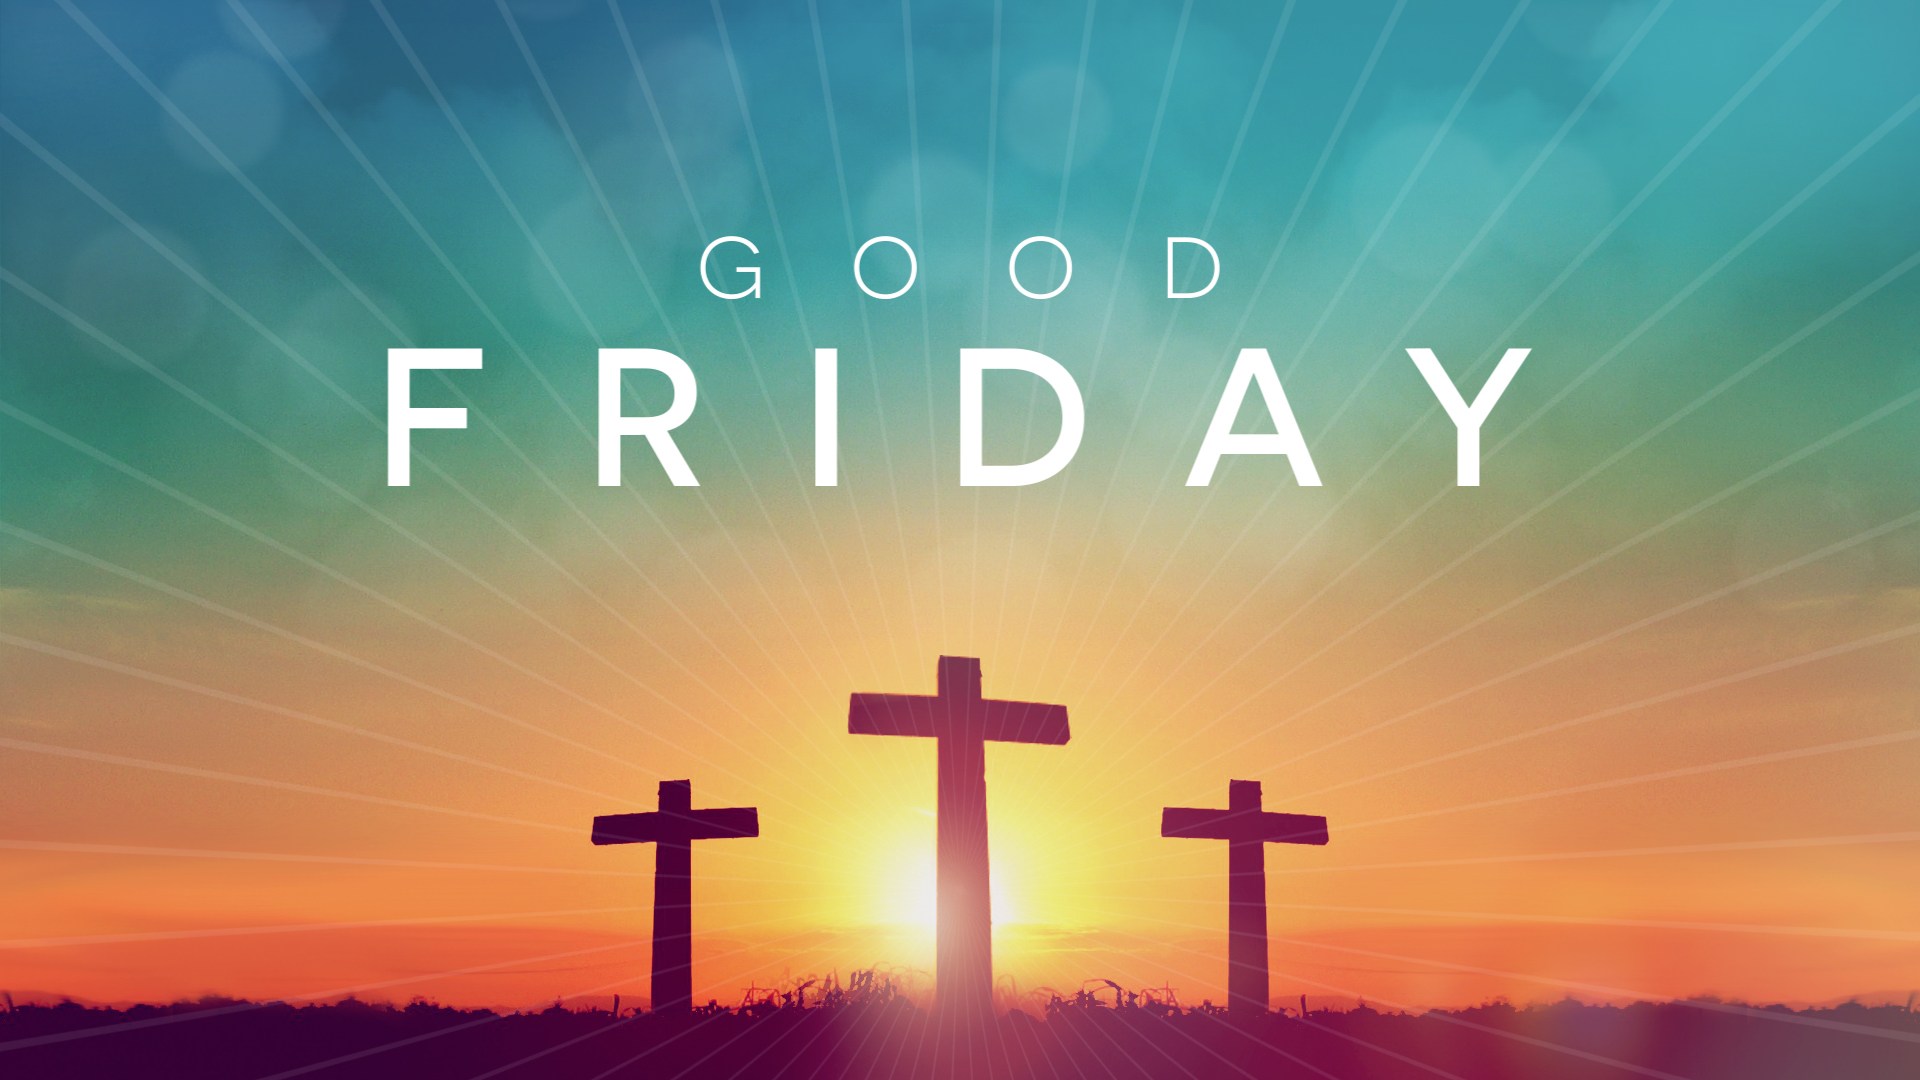 Good Friday Pics, Photos, Images, Greetings and Quotes